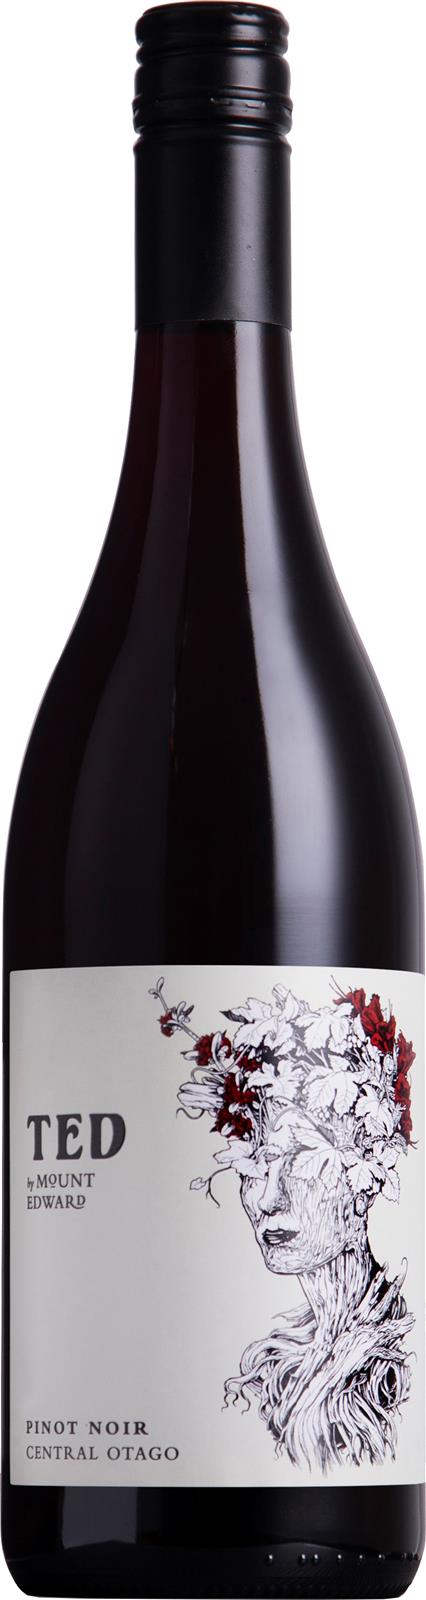 Ted by Mount Edward Central Otago Pinot Noir 2018